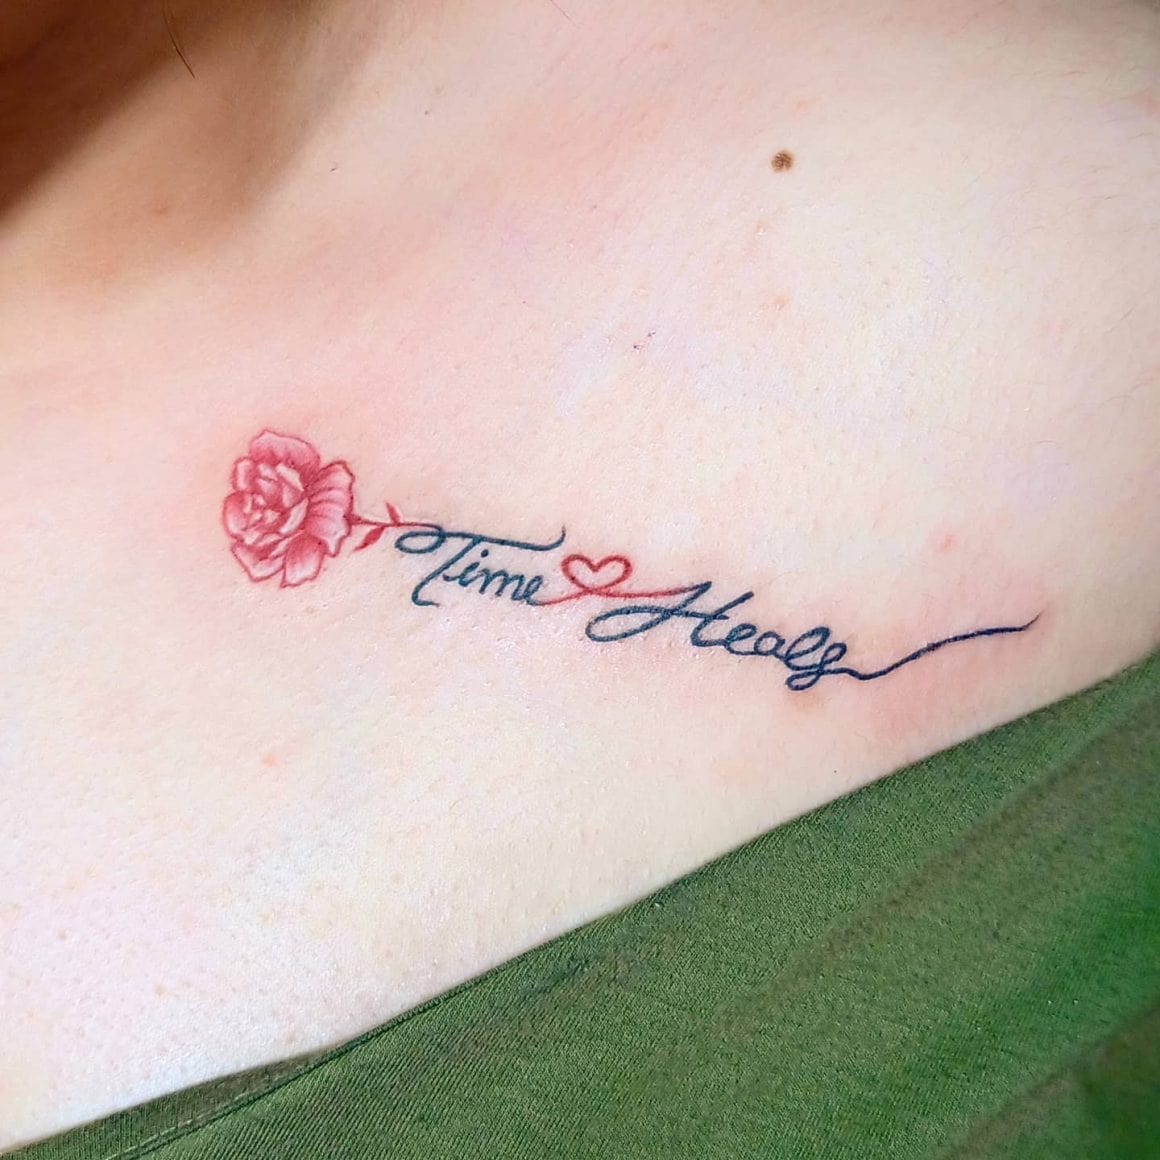 18 Time Heals All Wounds Tattoos To Help You Grieve